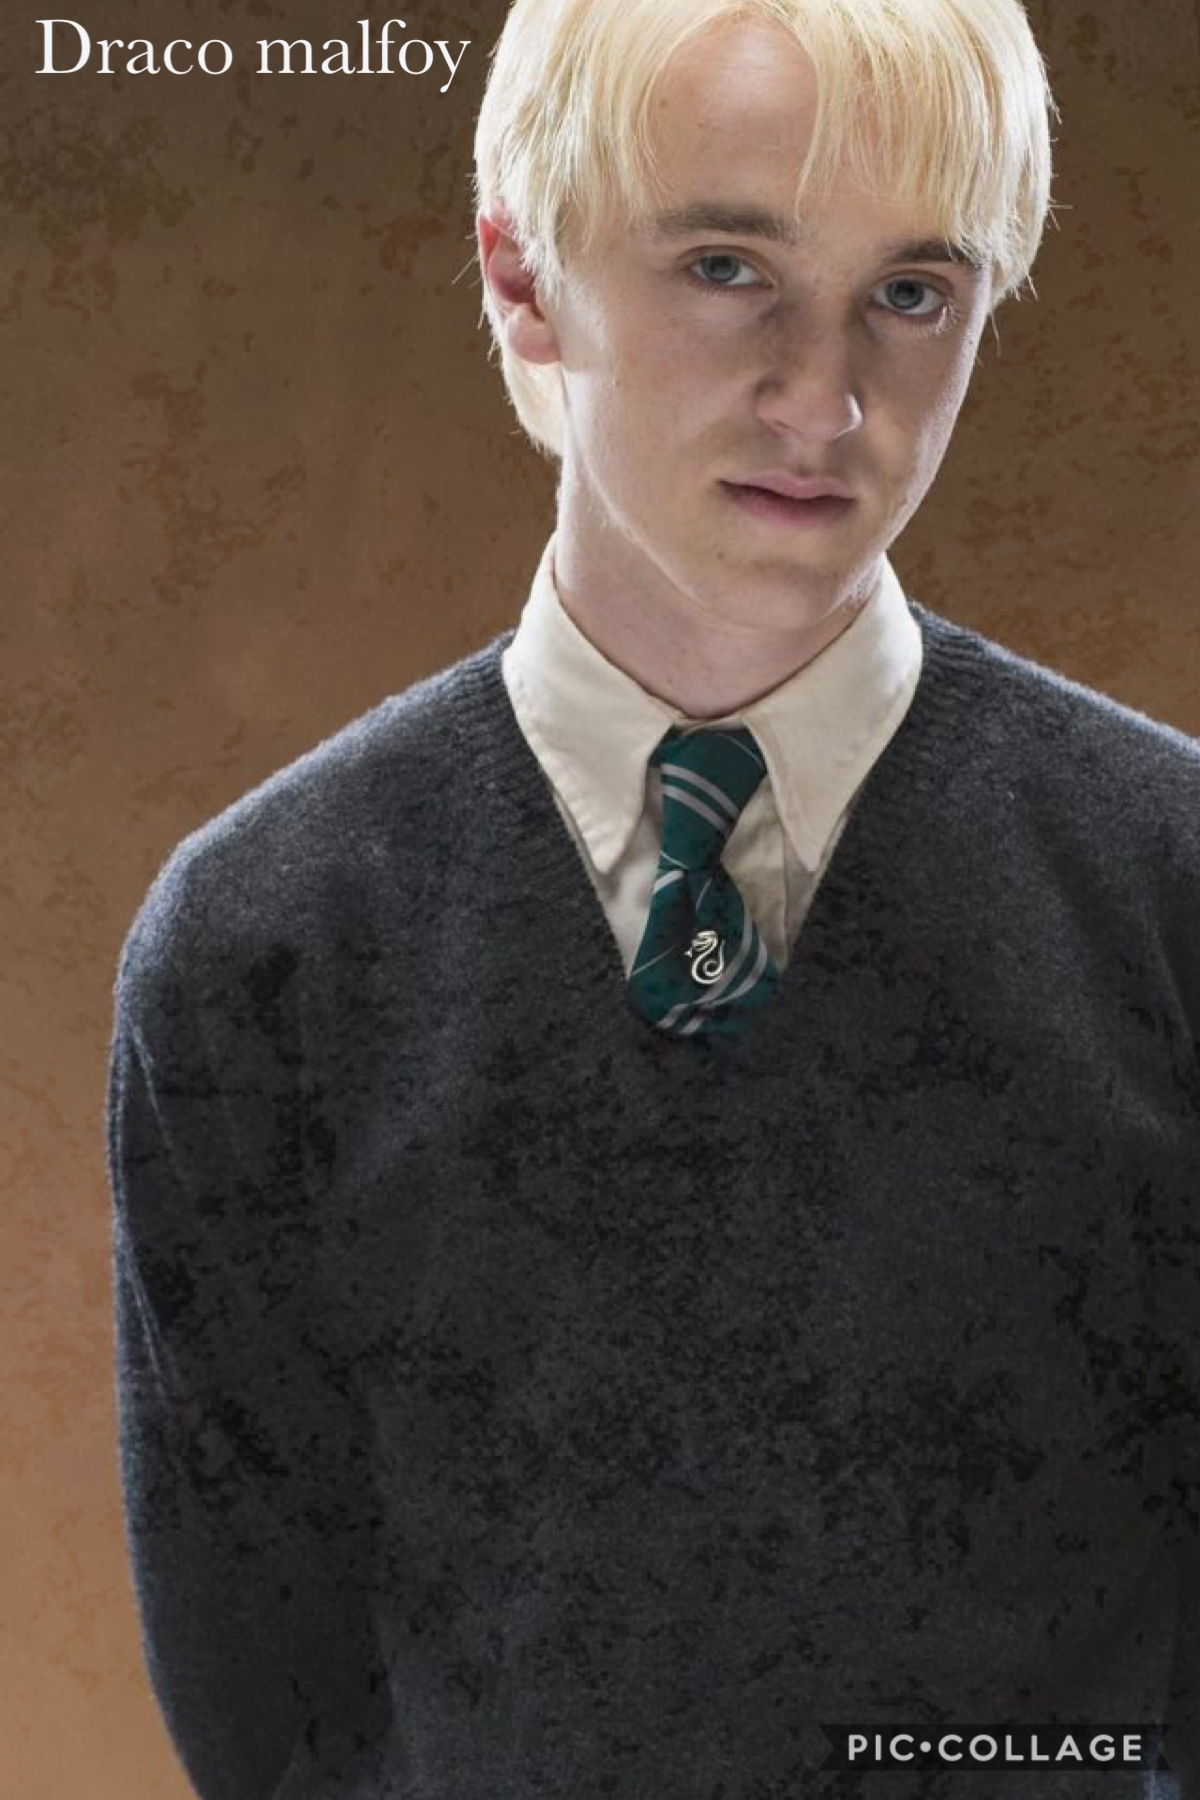 Dose anyone else have a obsession with draco??